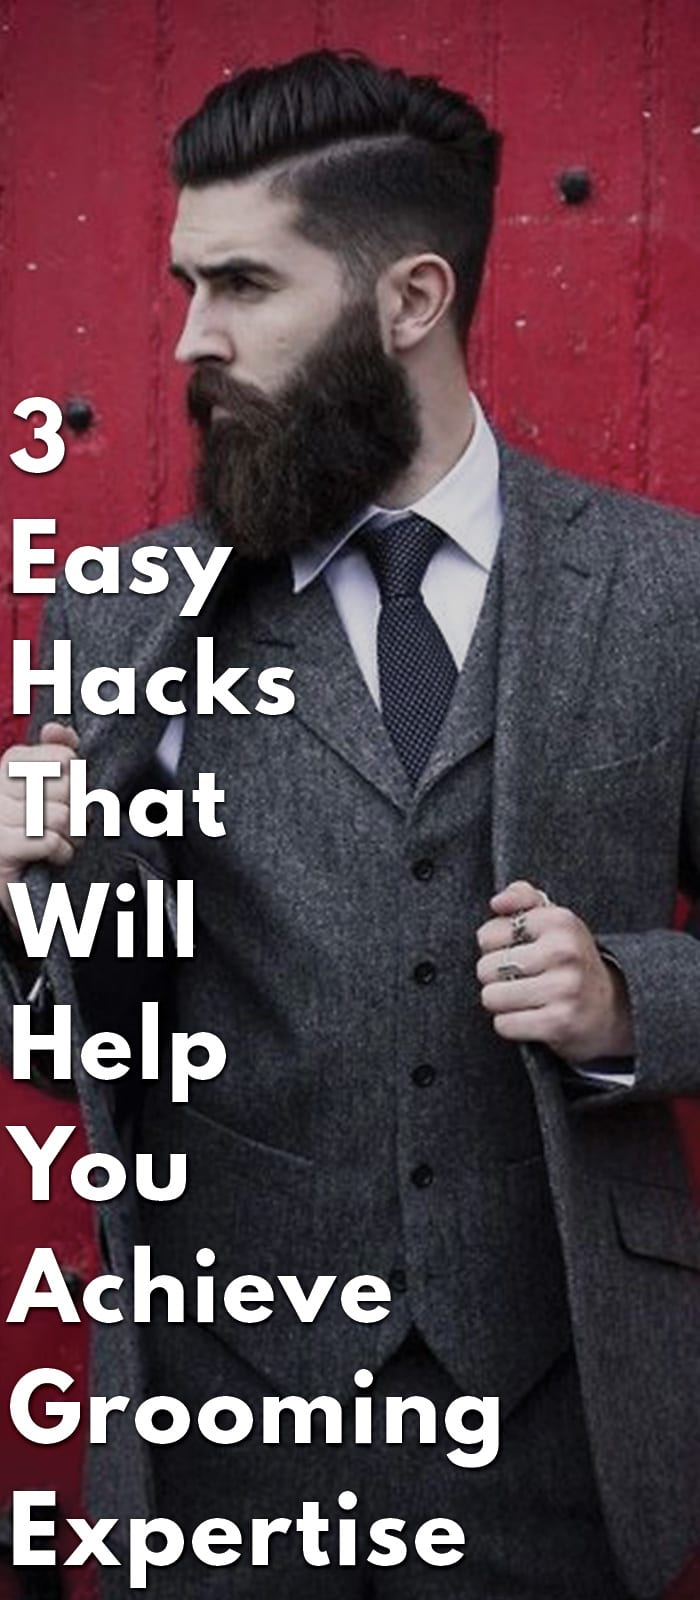 3-Easy-Hacks-That-Will-Help-You-Achieve-Grooming-Expertise